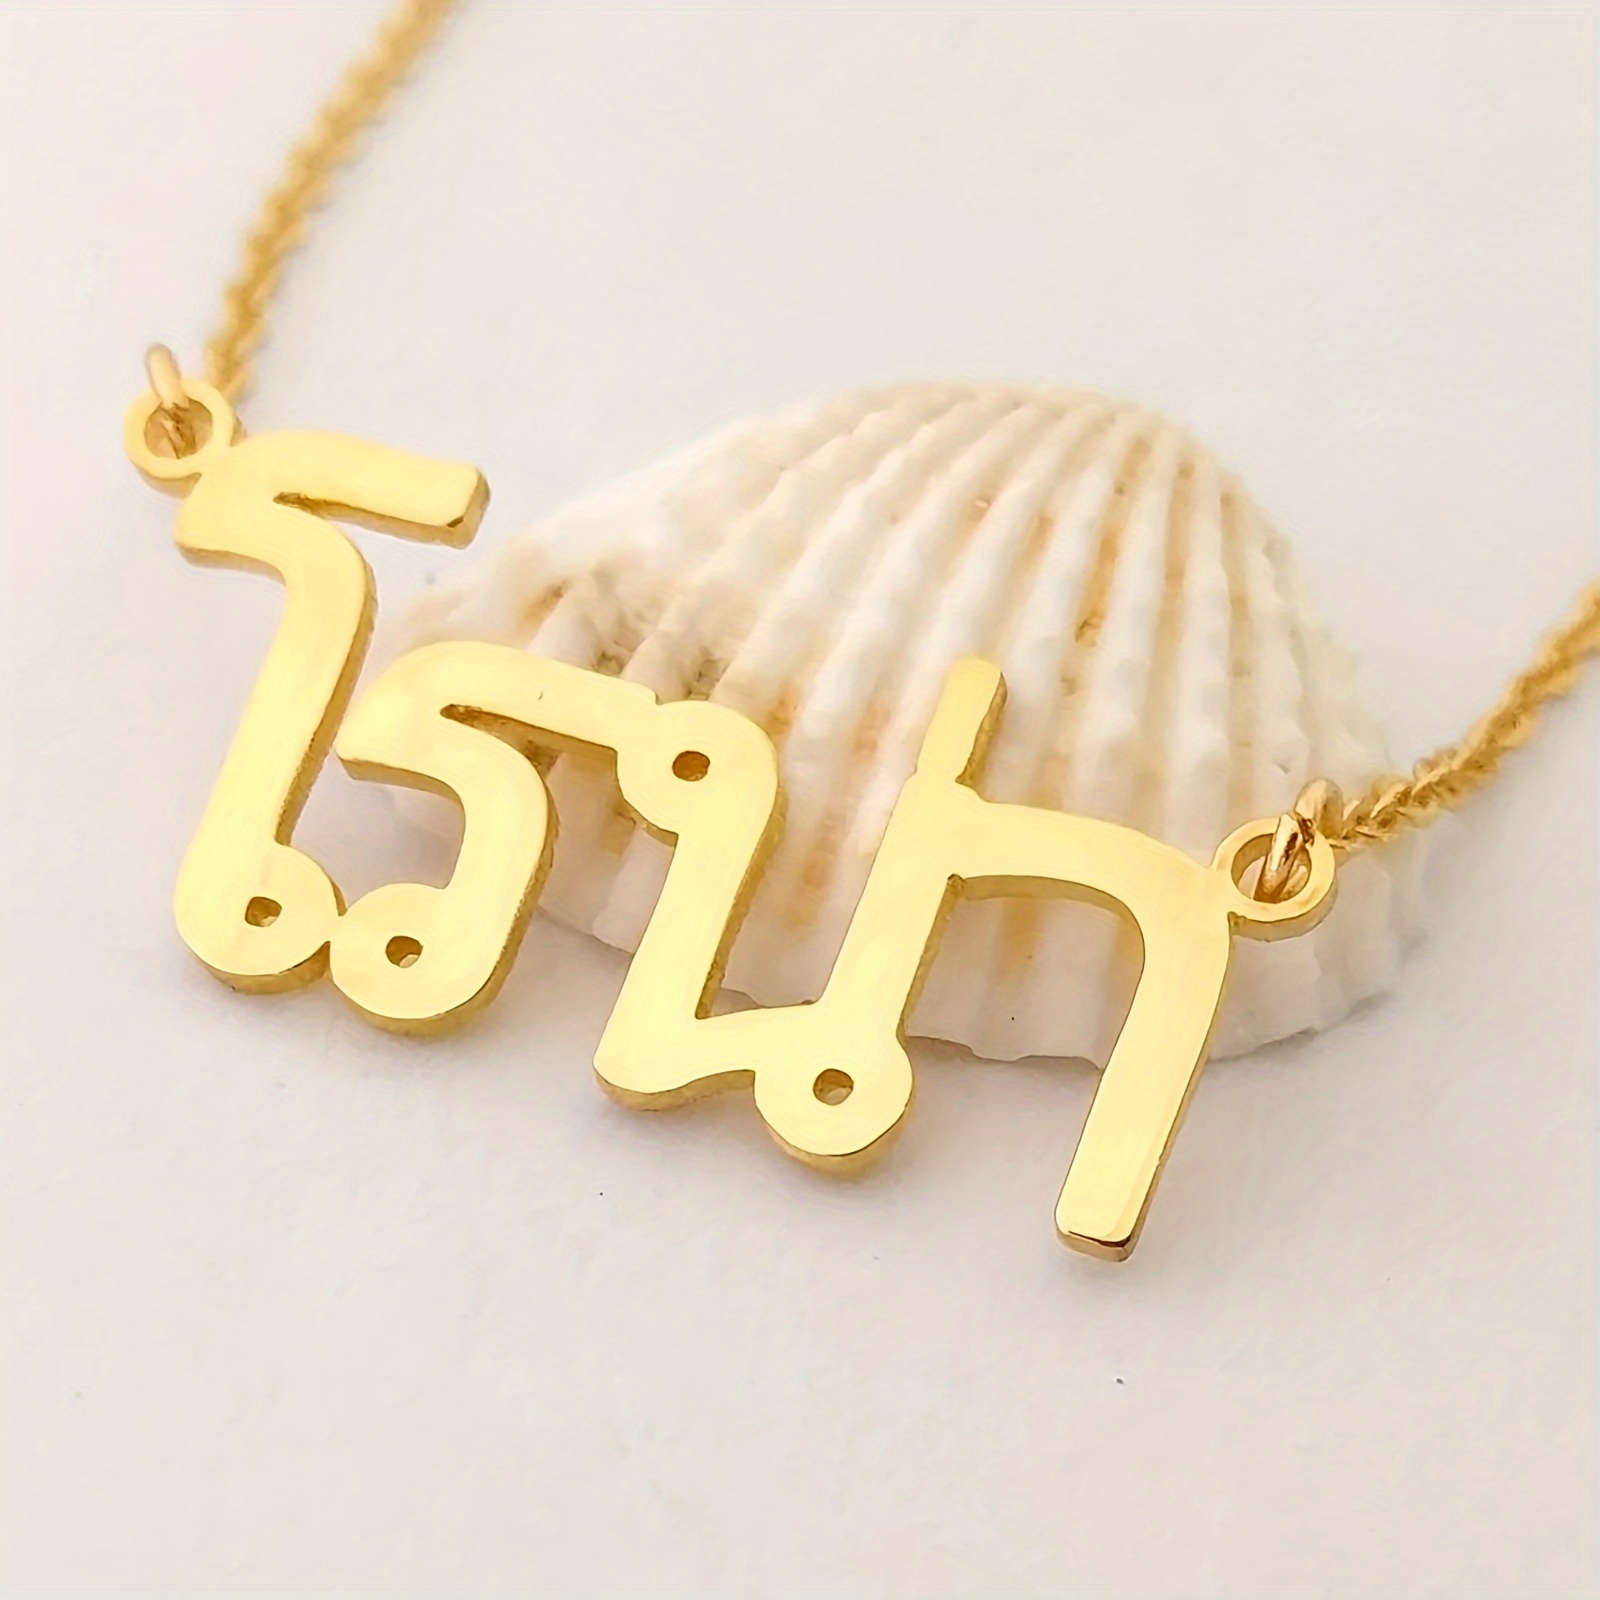 

Customized Personalized Thai Language Name Pendant Necklace Simple Style Adjustable Neck Chain Jewelry Birthday Gift (only Thai Language)